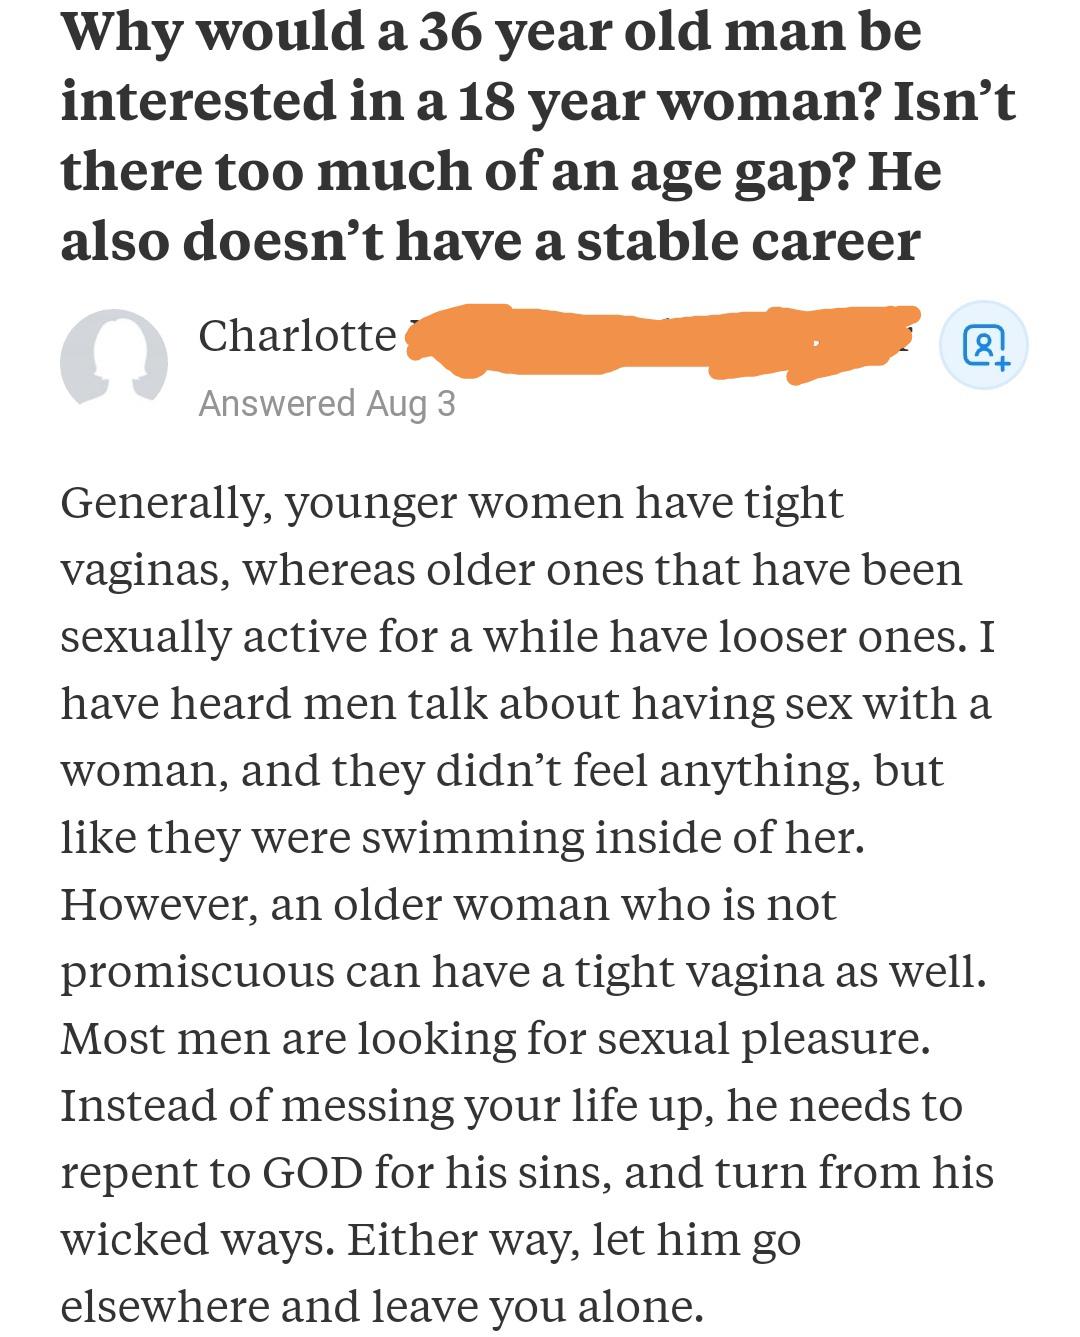 angle - Why would a 36 year old man be interested in a 18 year woman? Isn't there too much of an age gap? He also doesn't have a stable career Charlotte Answered Aug 3 Generally, younger women have tight vaginas, whereas older ones that have been sexually